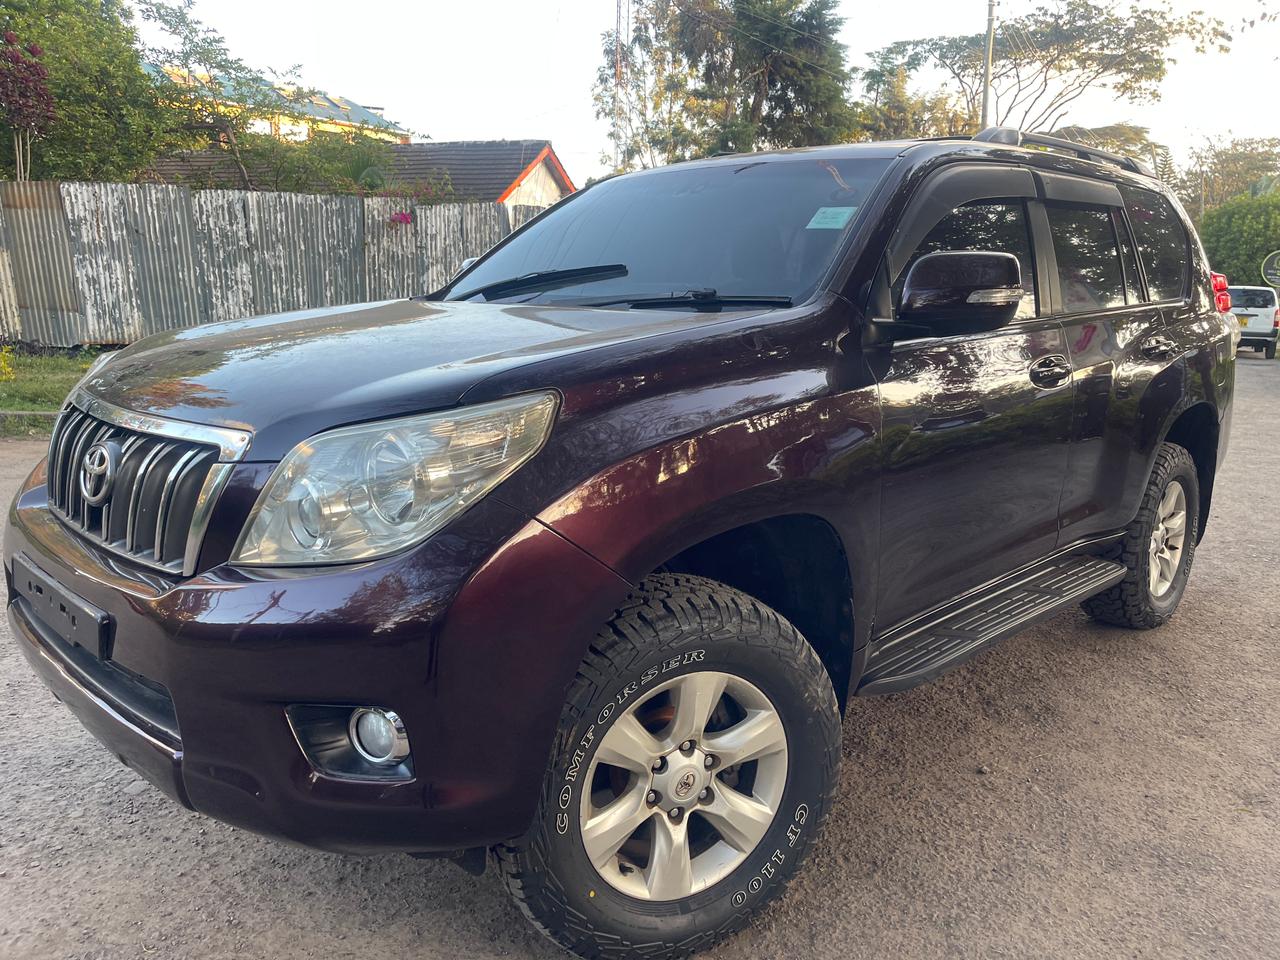 Toyota Prado j150 DIESEL KDK 3.7M ONLY You Pay 30% Deposit Trade in OK with SUNROOF